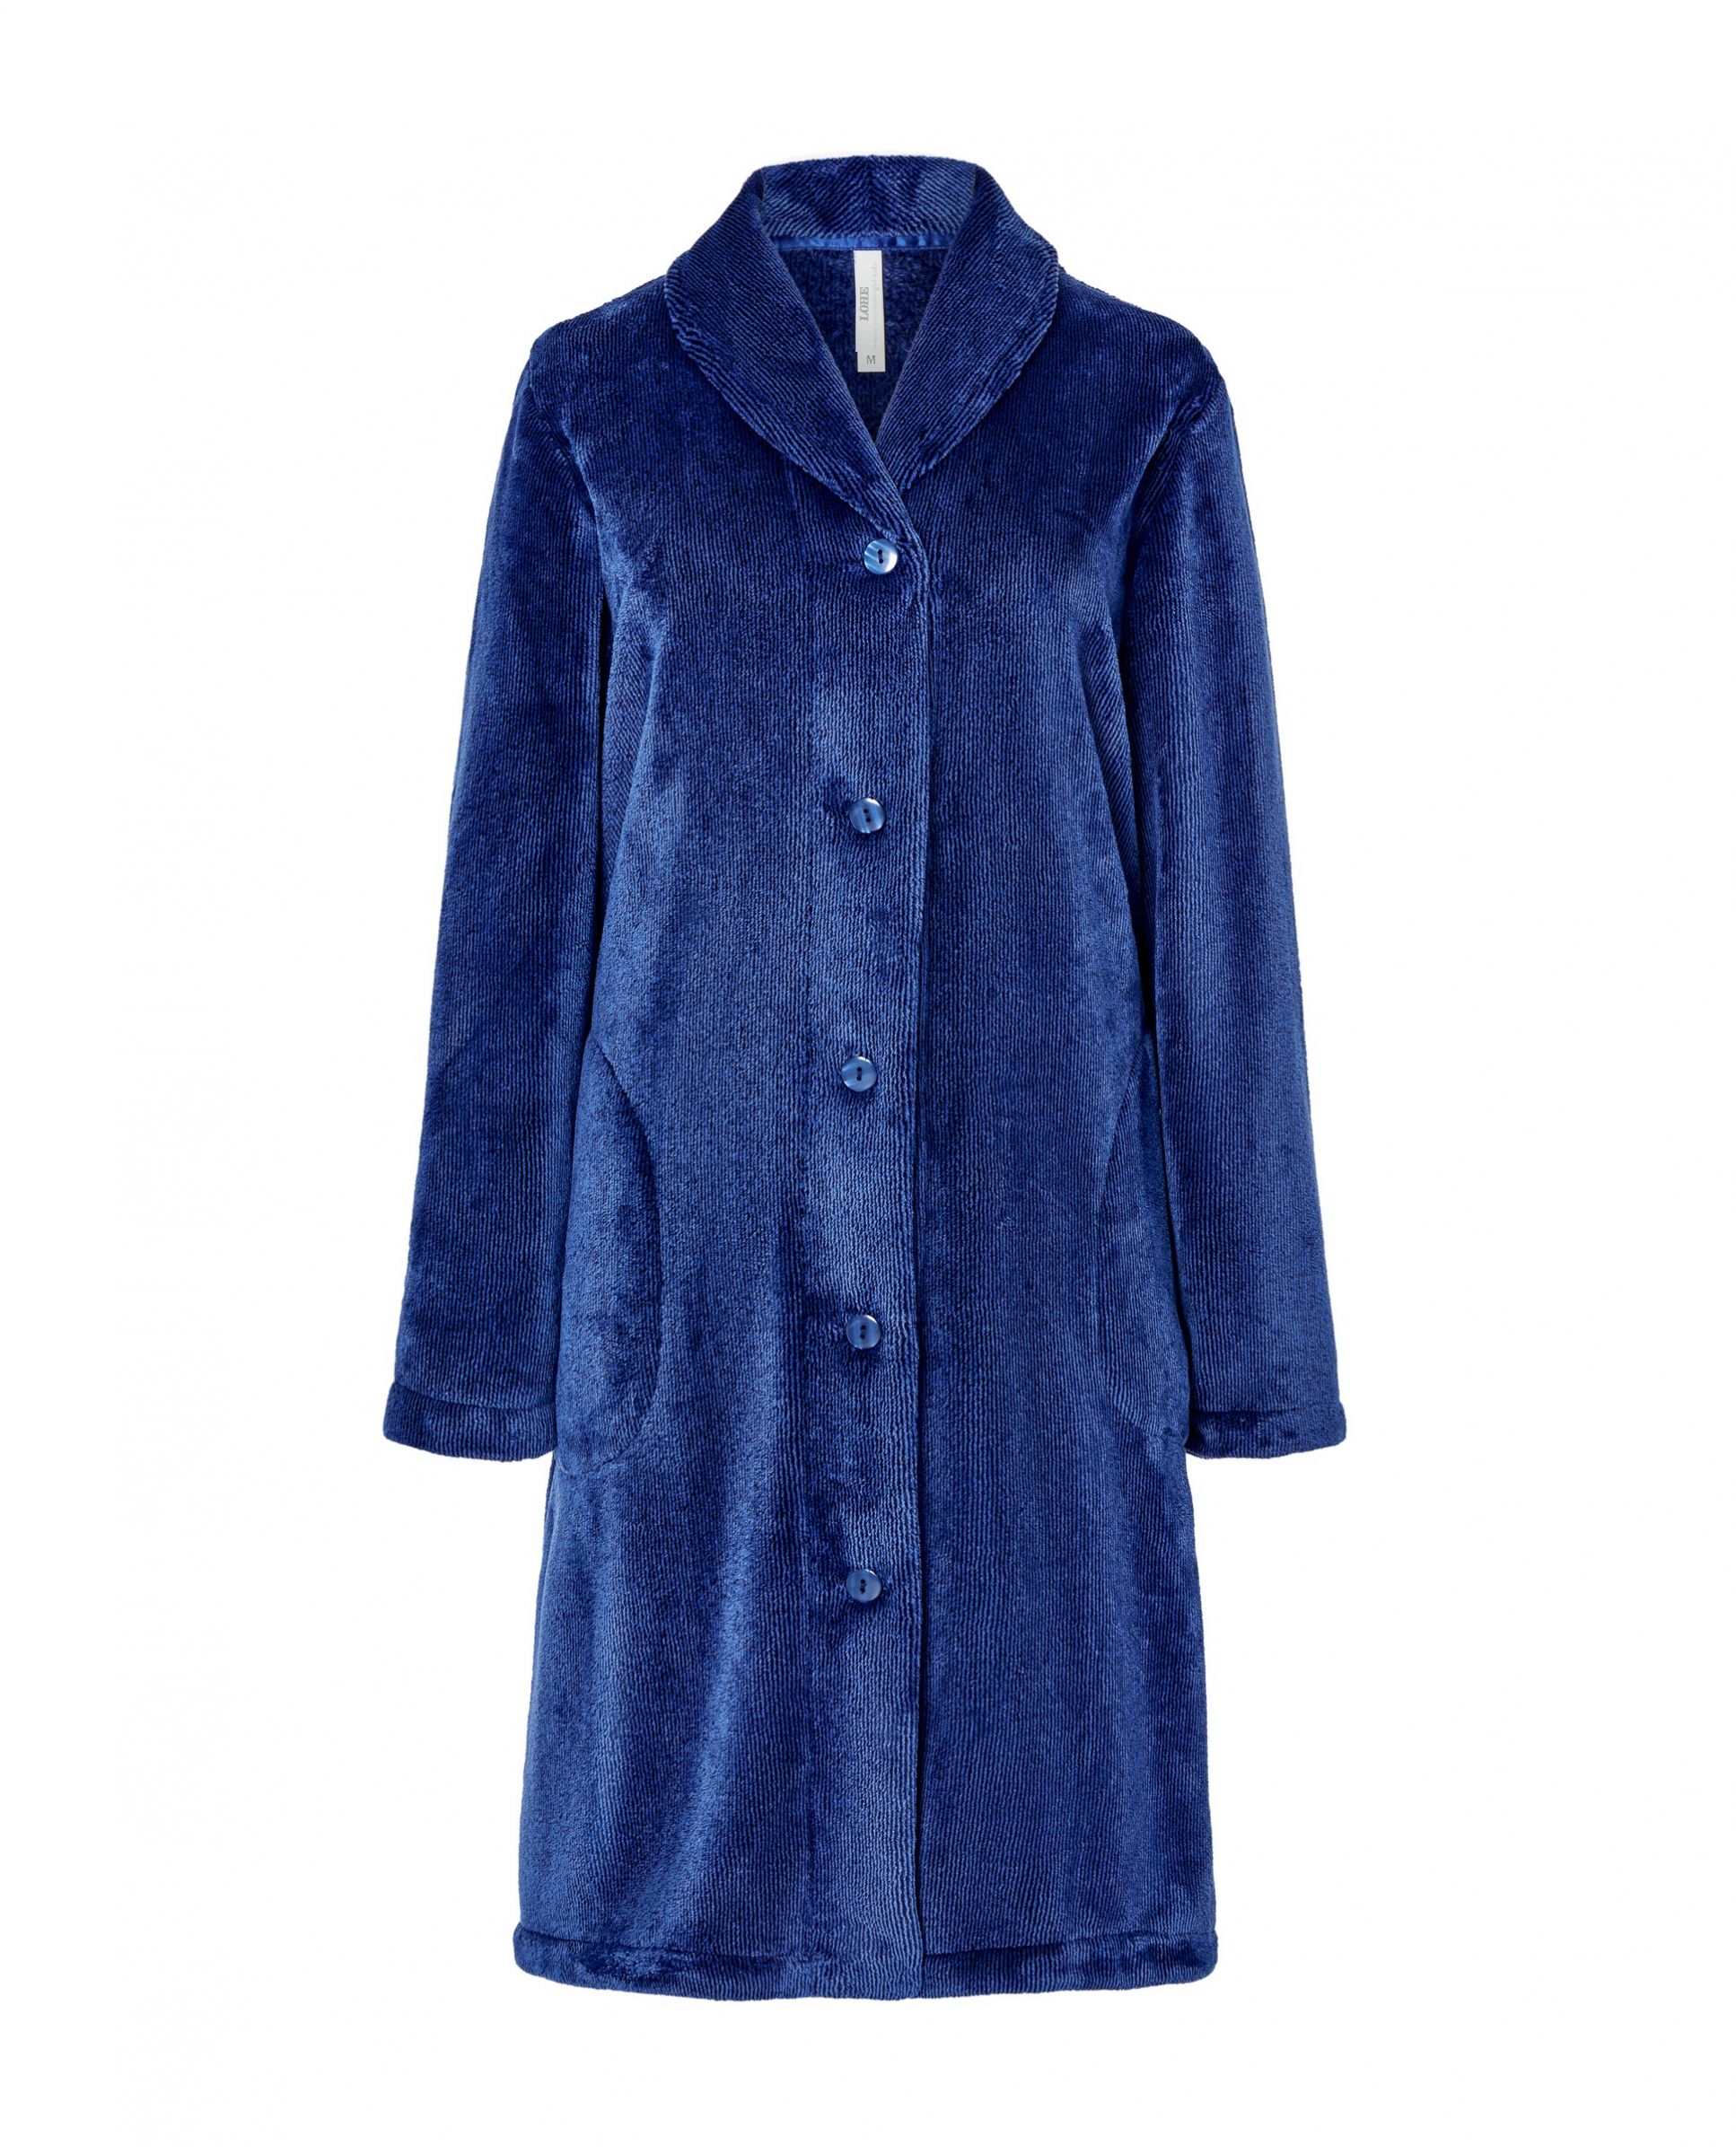 Lohe women's long dressing gown, open with buttons, long sleeves, dinner jacket collar, with side pockets.